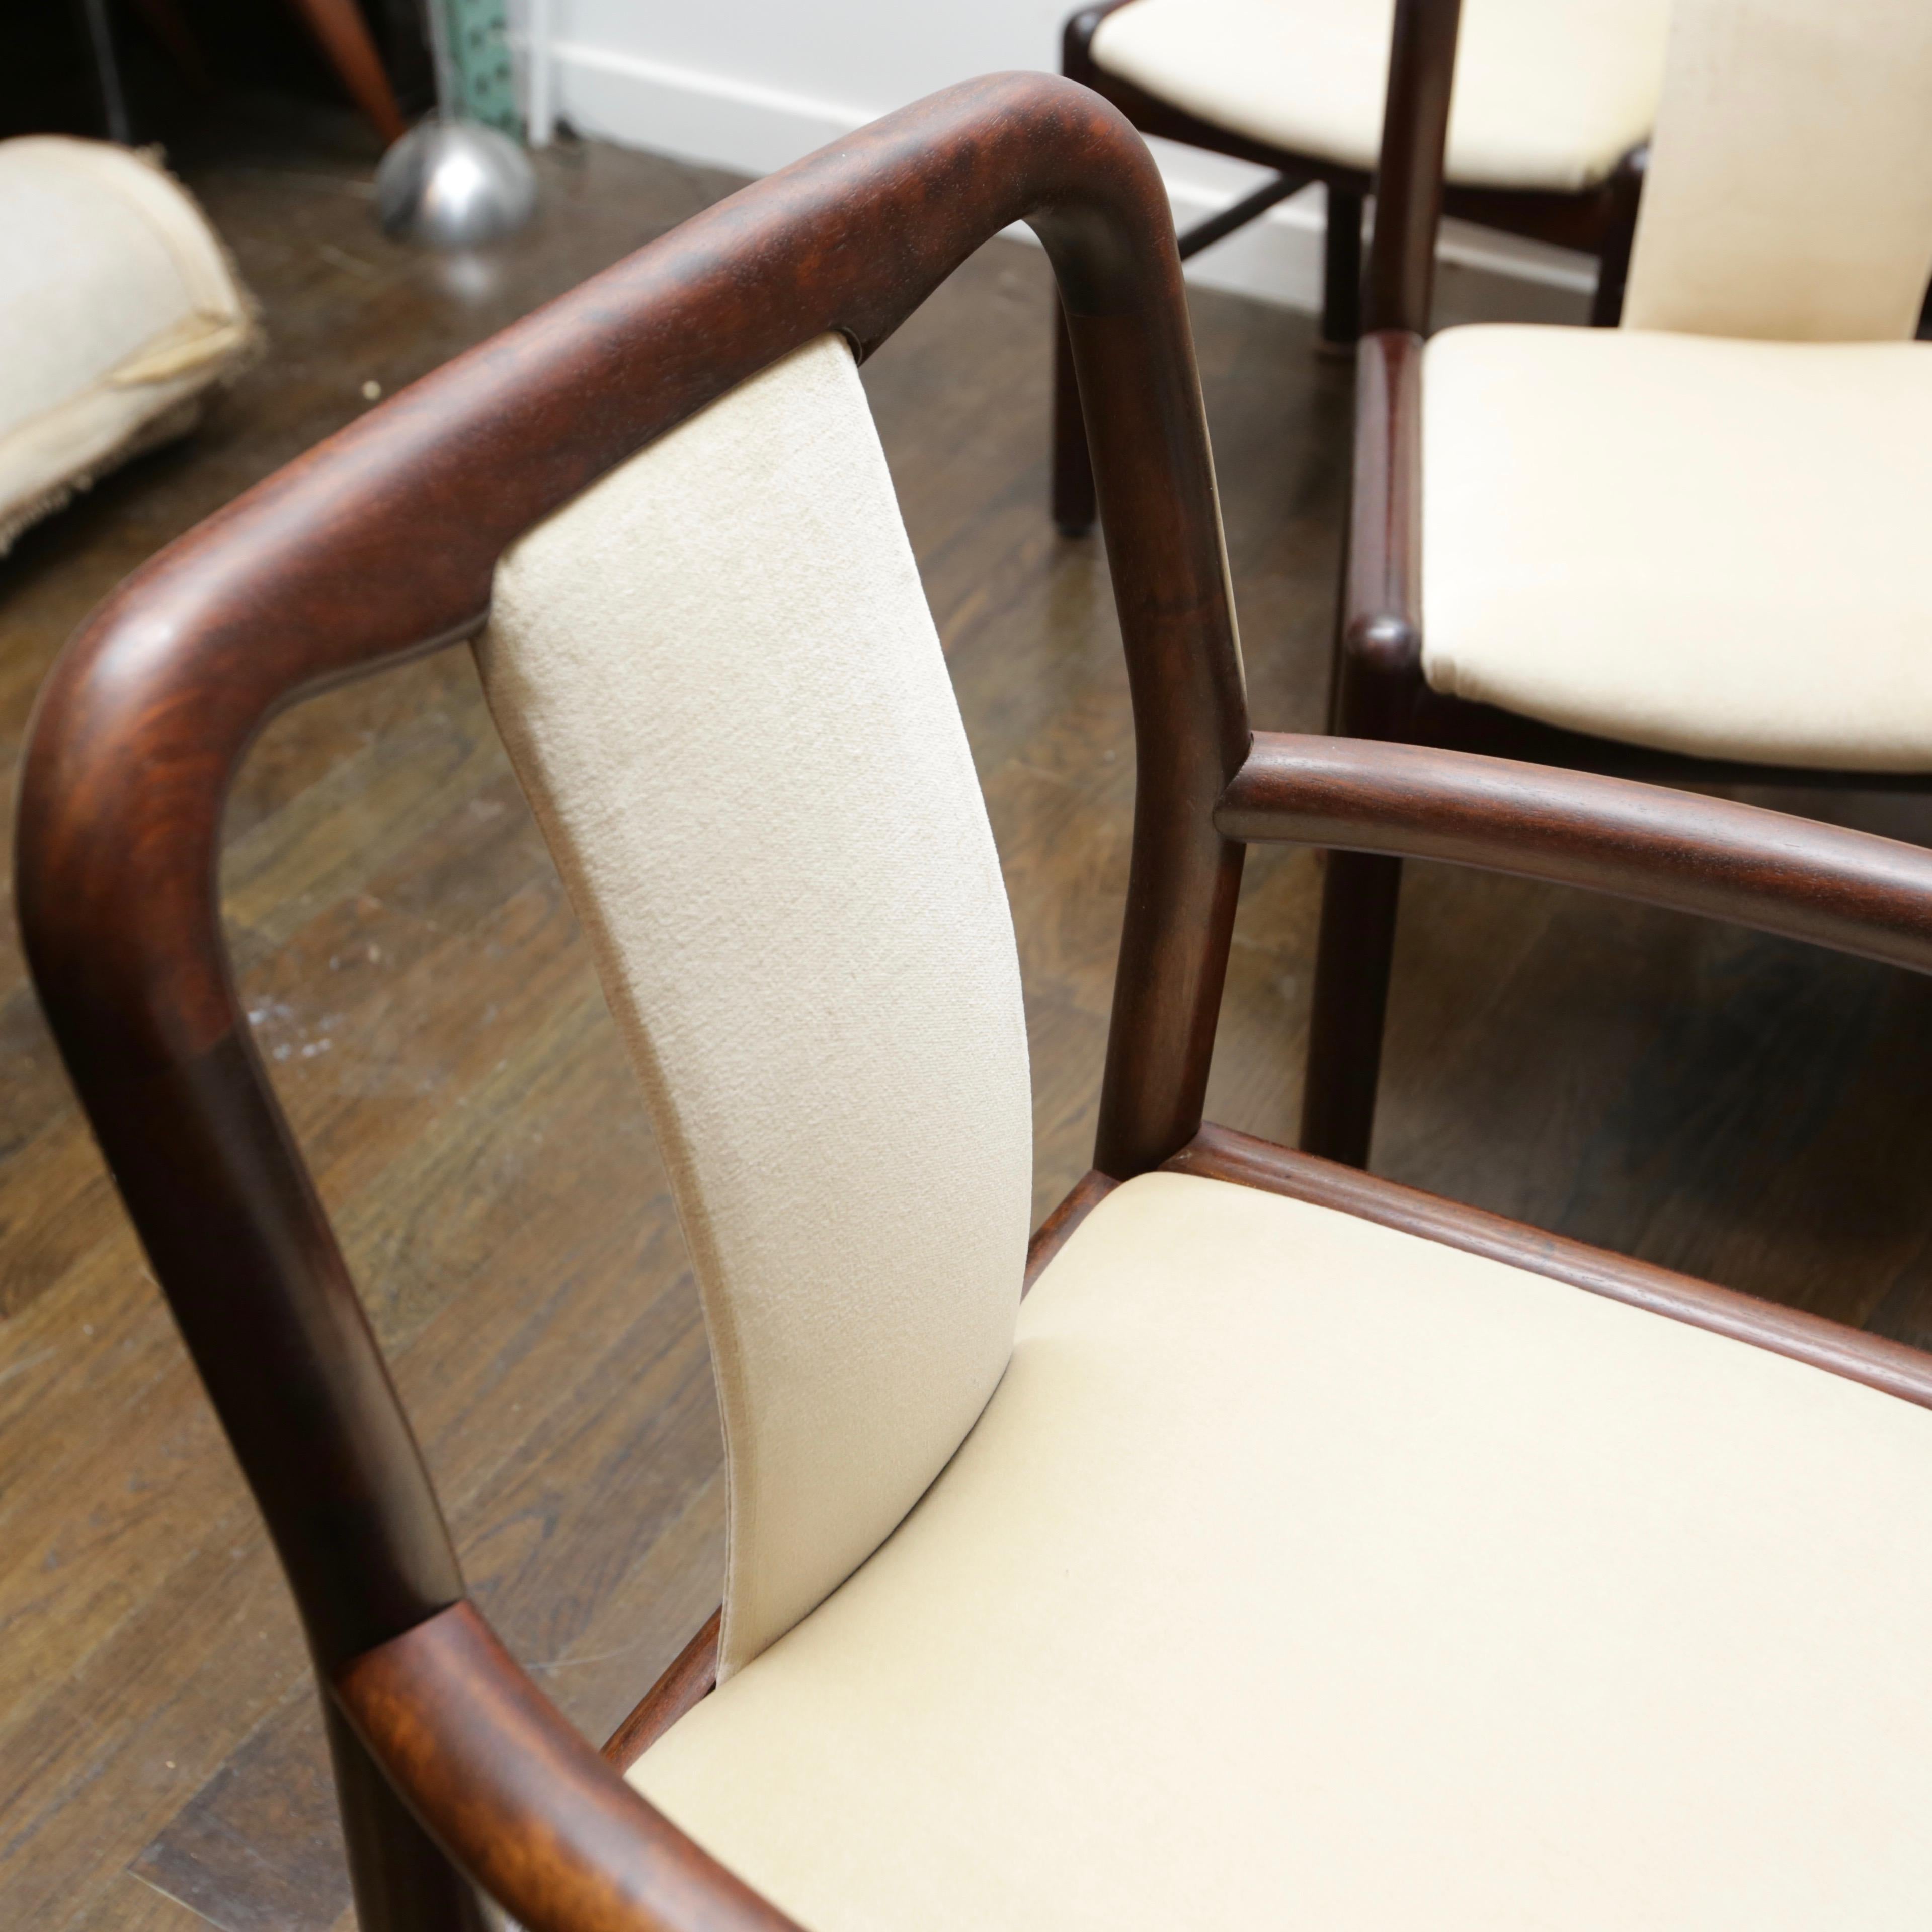 Newly reupholstered set of Danish modern rosewood dining chairs from the 1960s. Chairs are solid rosewood and well constructed. Armchairs are 24